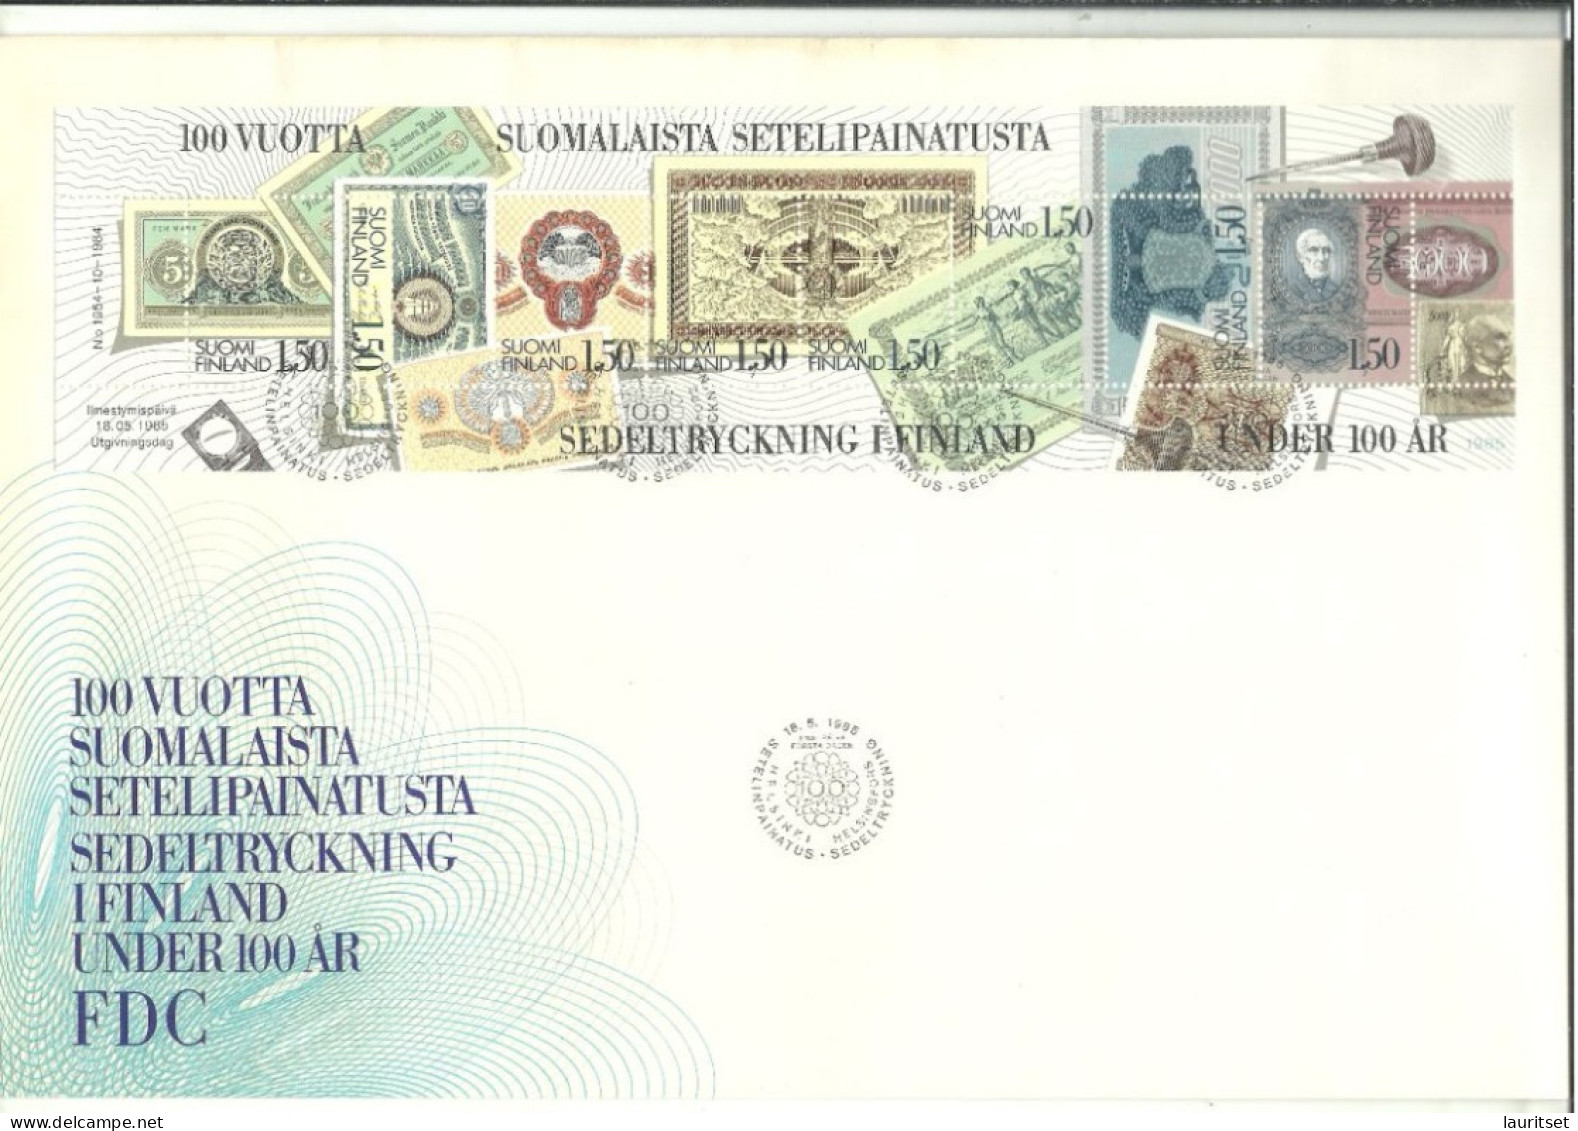 FINLAND FINNLAND 1985 FDC Michel 960 - 967 Banknoten Bank Notes Very Big Size! - FDC